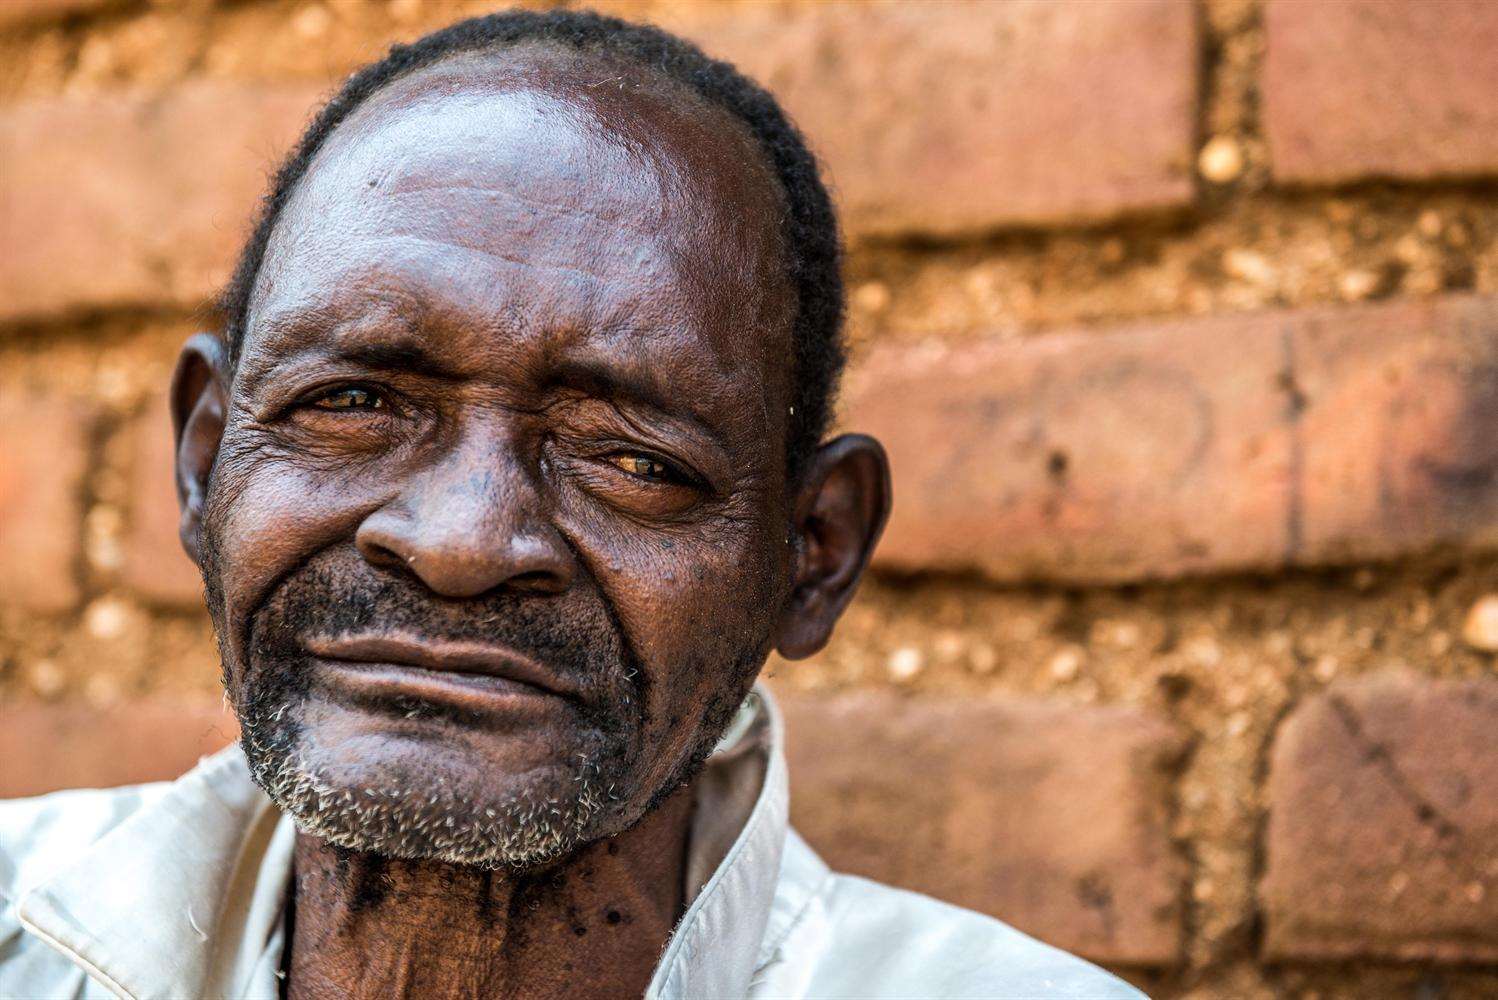 Malawi man Winesi March is having his sight restored. Picture: Rachel Palmer Photography